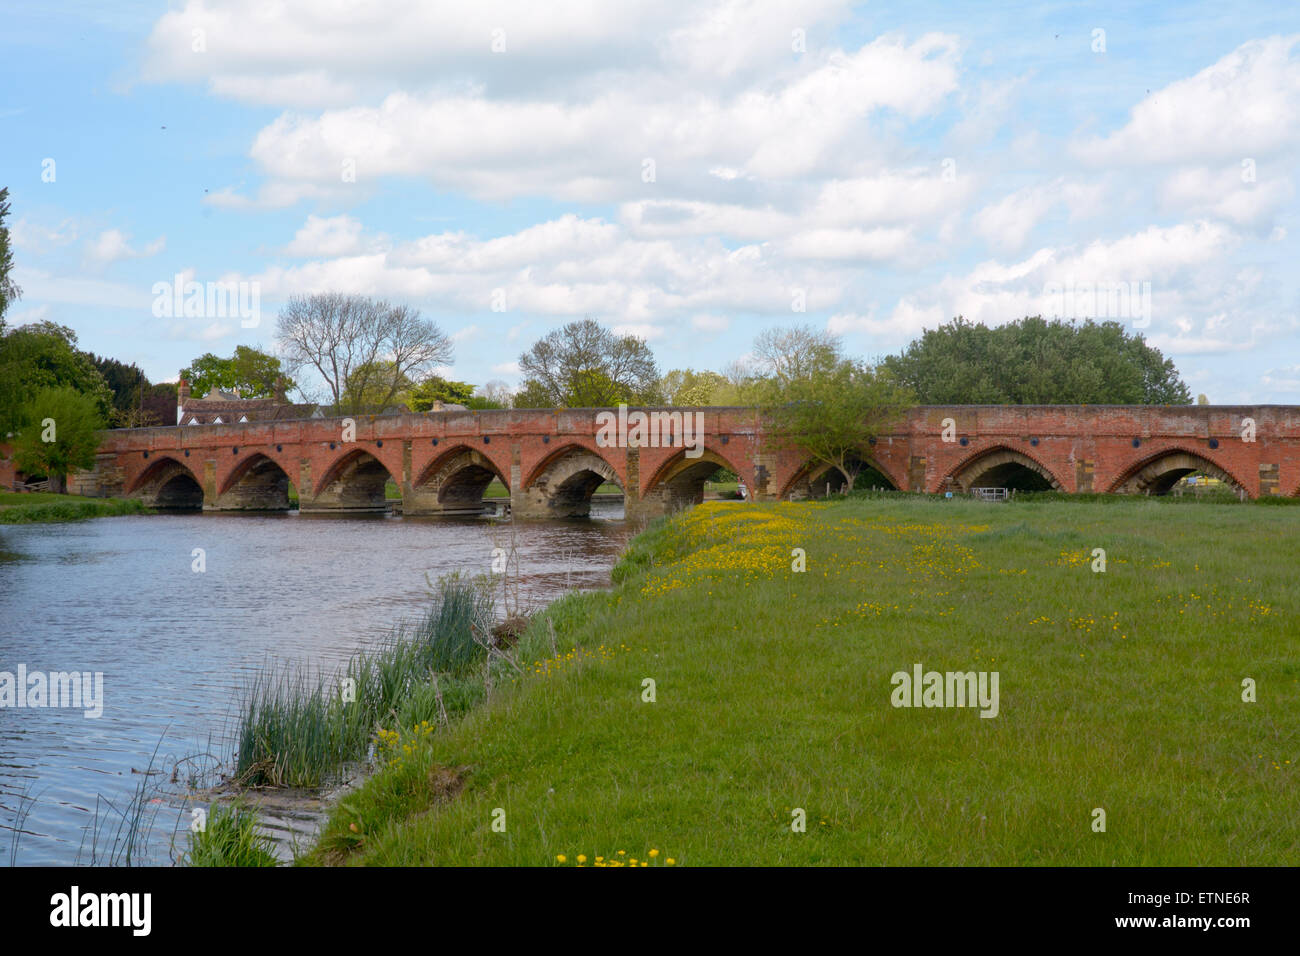 The 15th Century Great Barford Bridge over the River Ouse in Great Barford, Bedfordshire, England on a sunny day Stock Photo